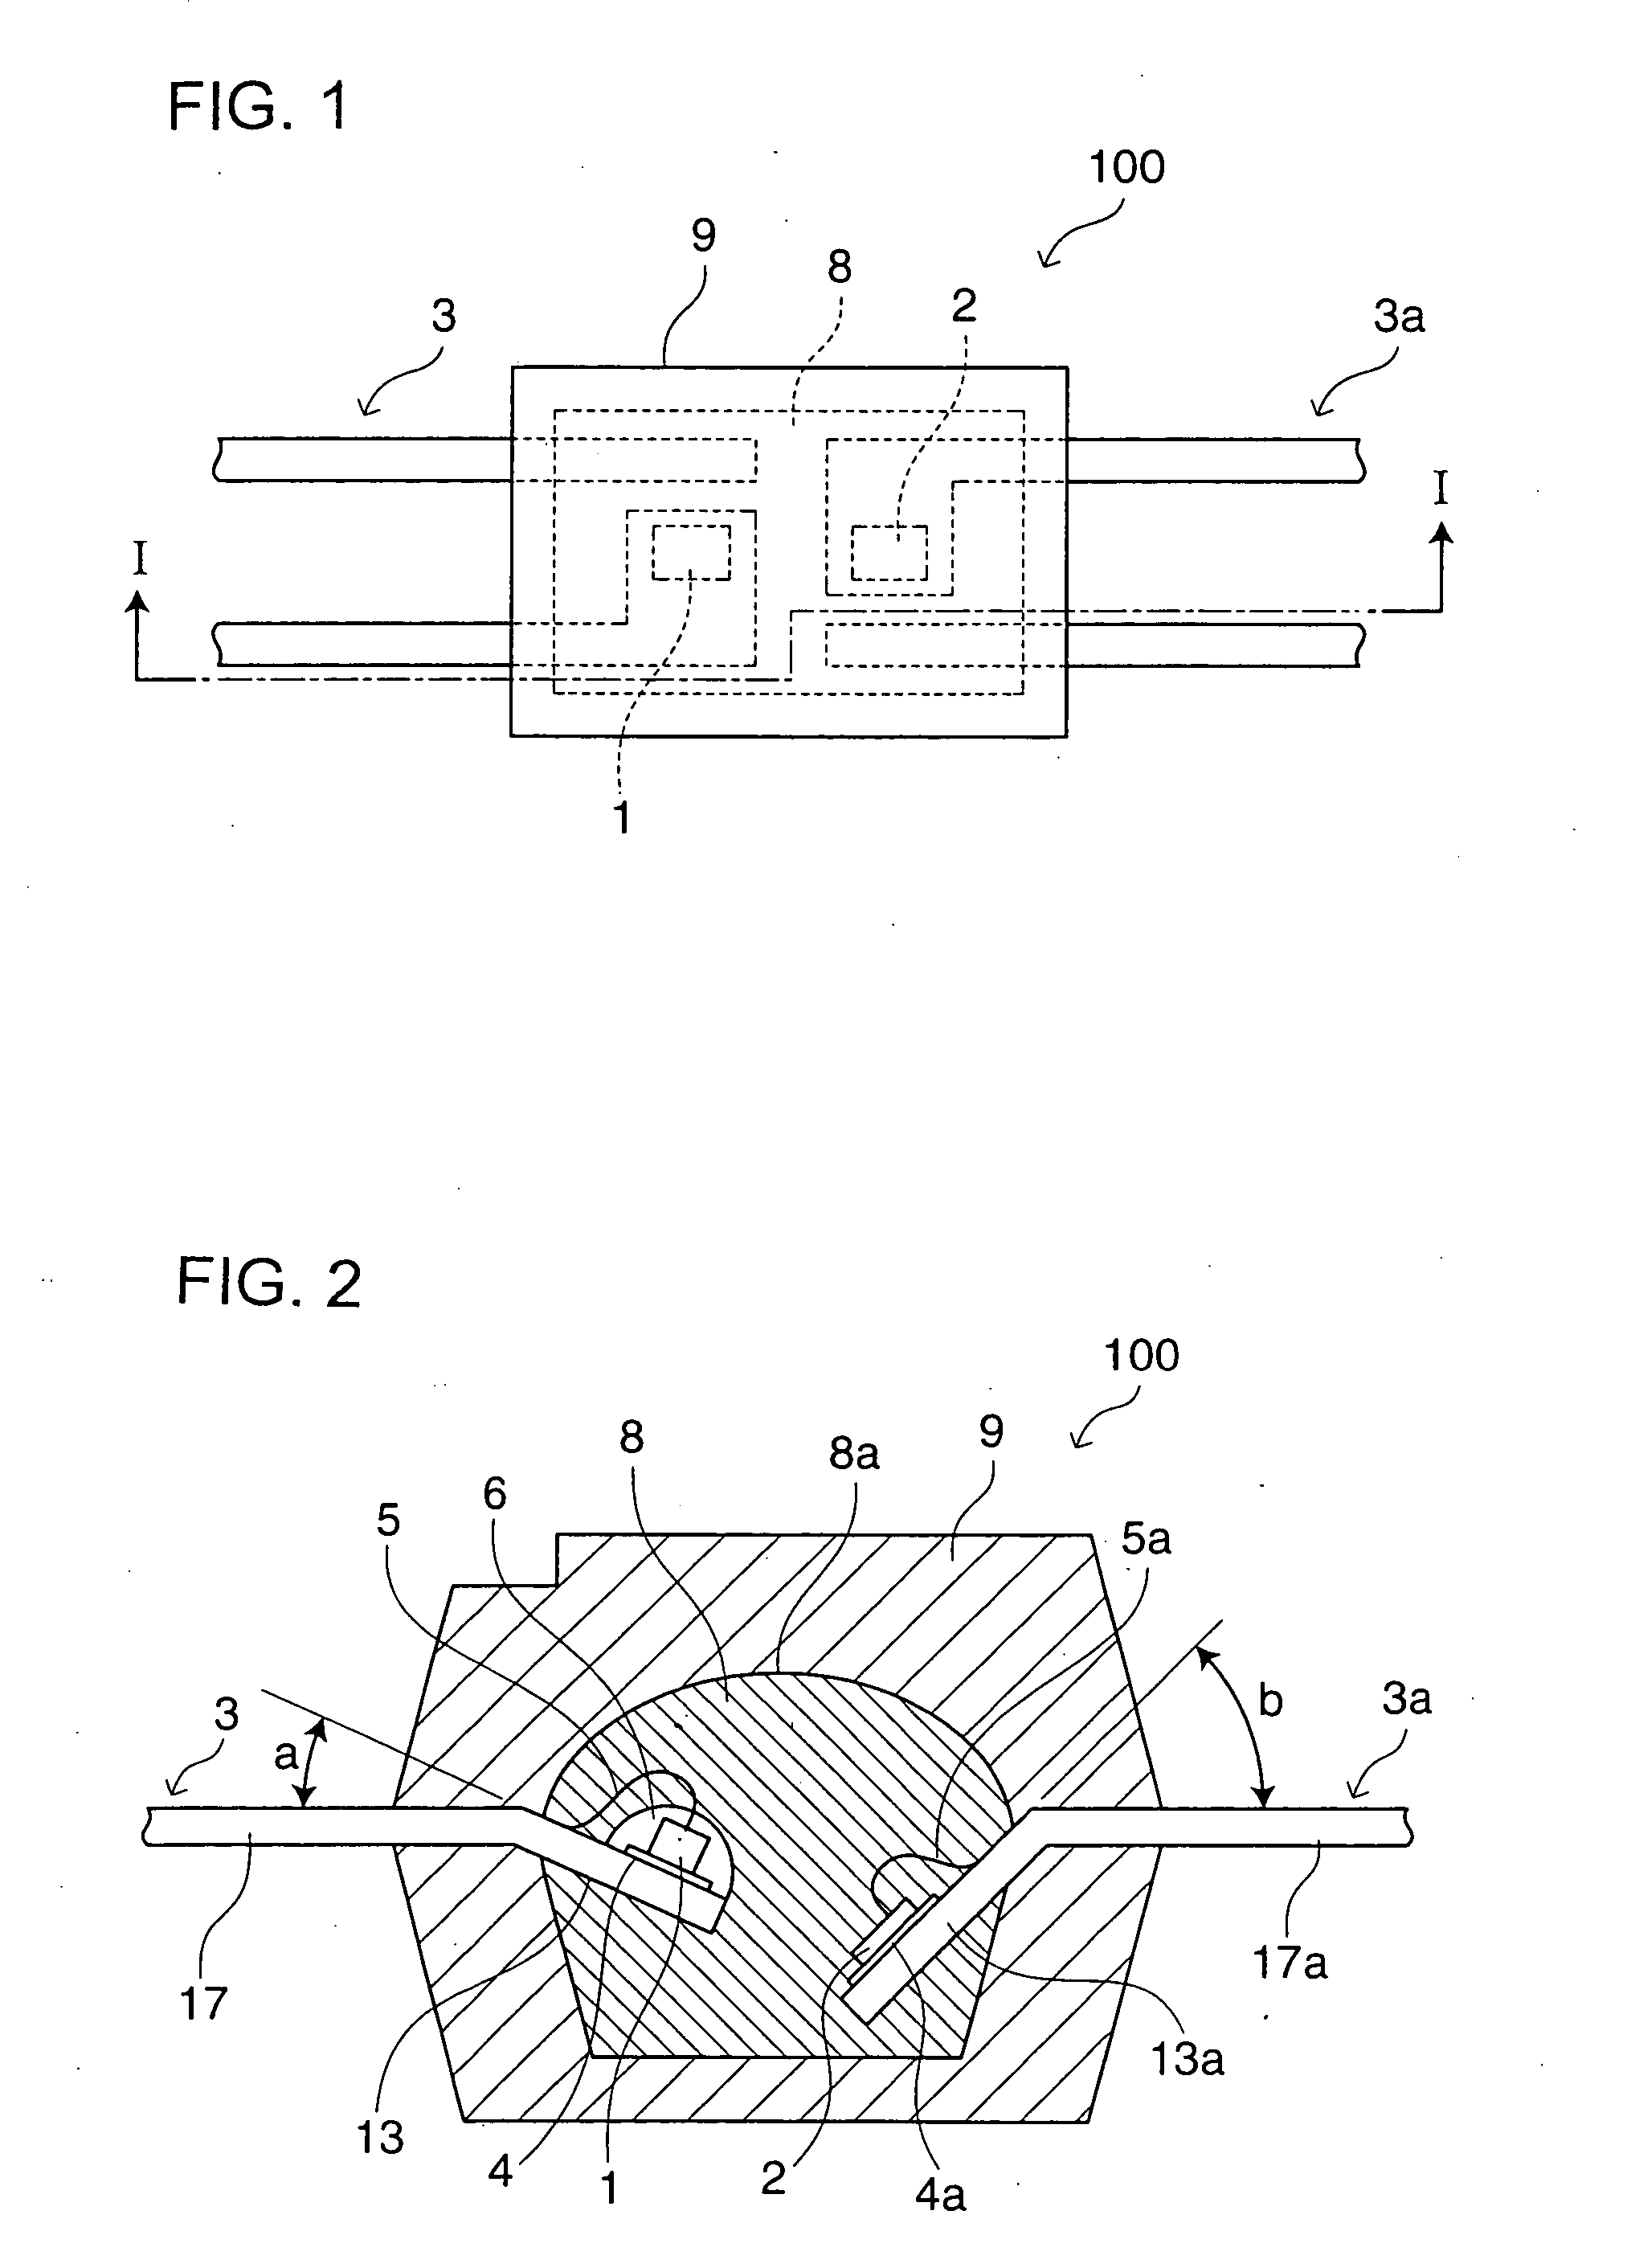 Photo-coupler semiconductor device and production method therefor